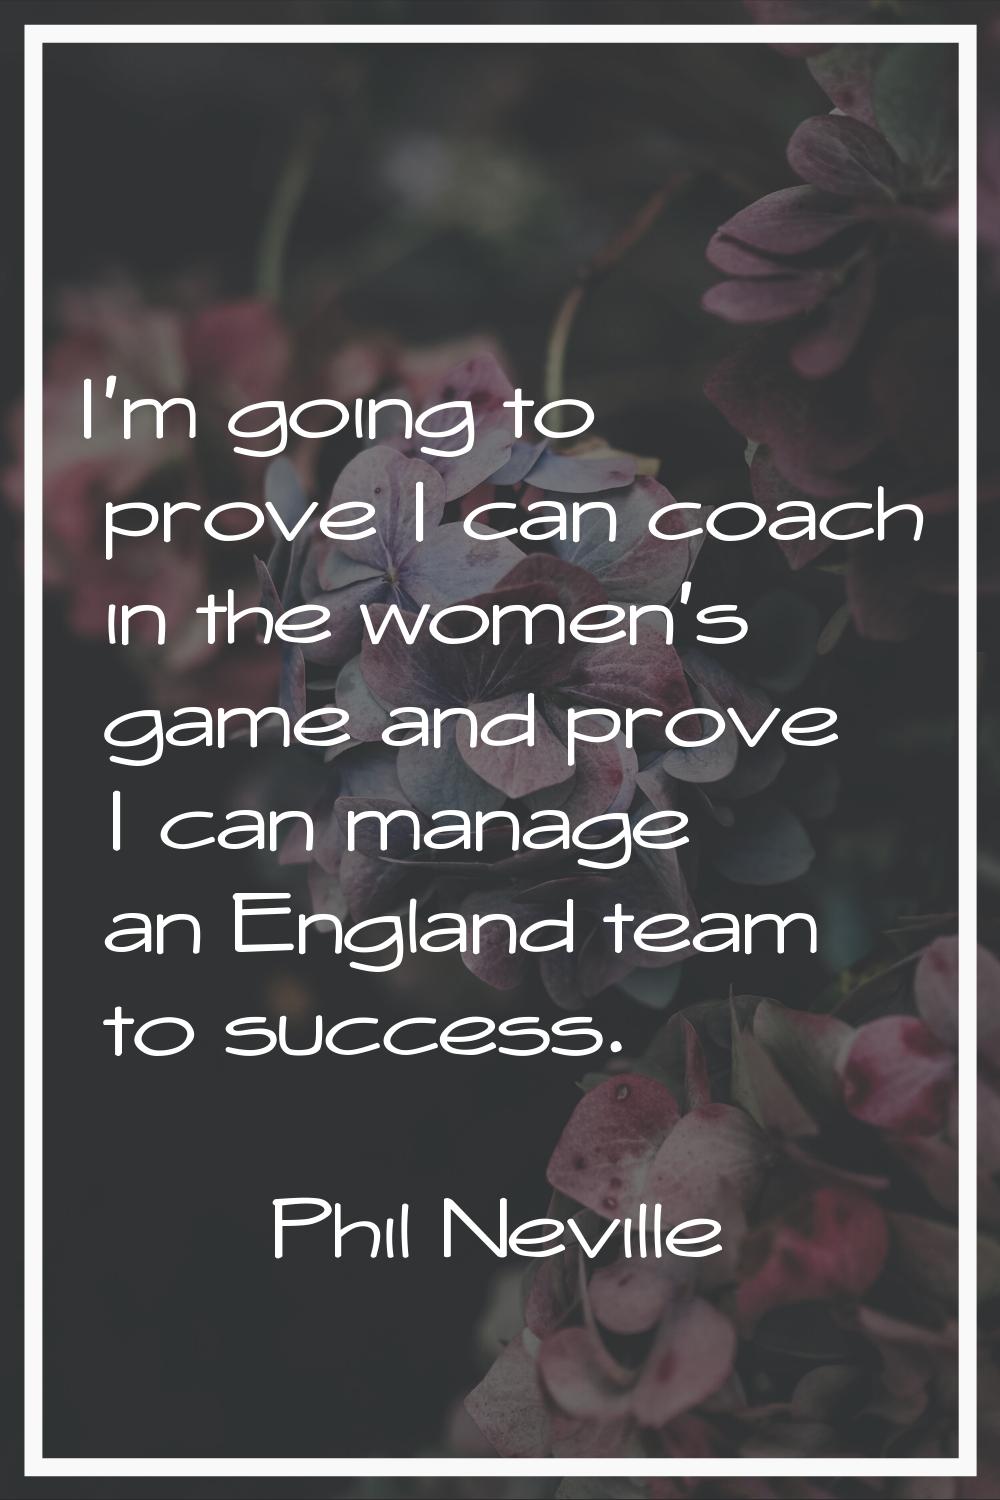 I'm going to prove I can coach in the women's game and prove I can manage an England team to succes